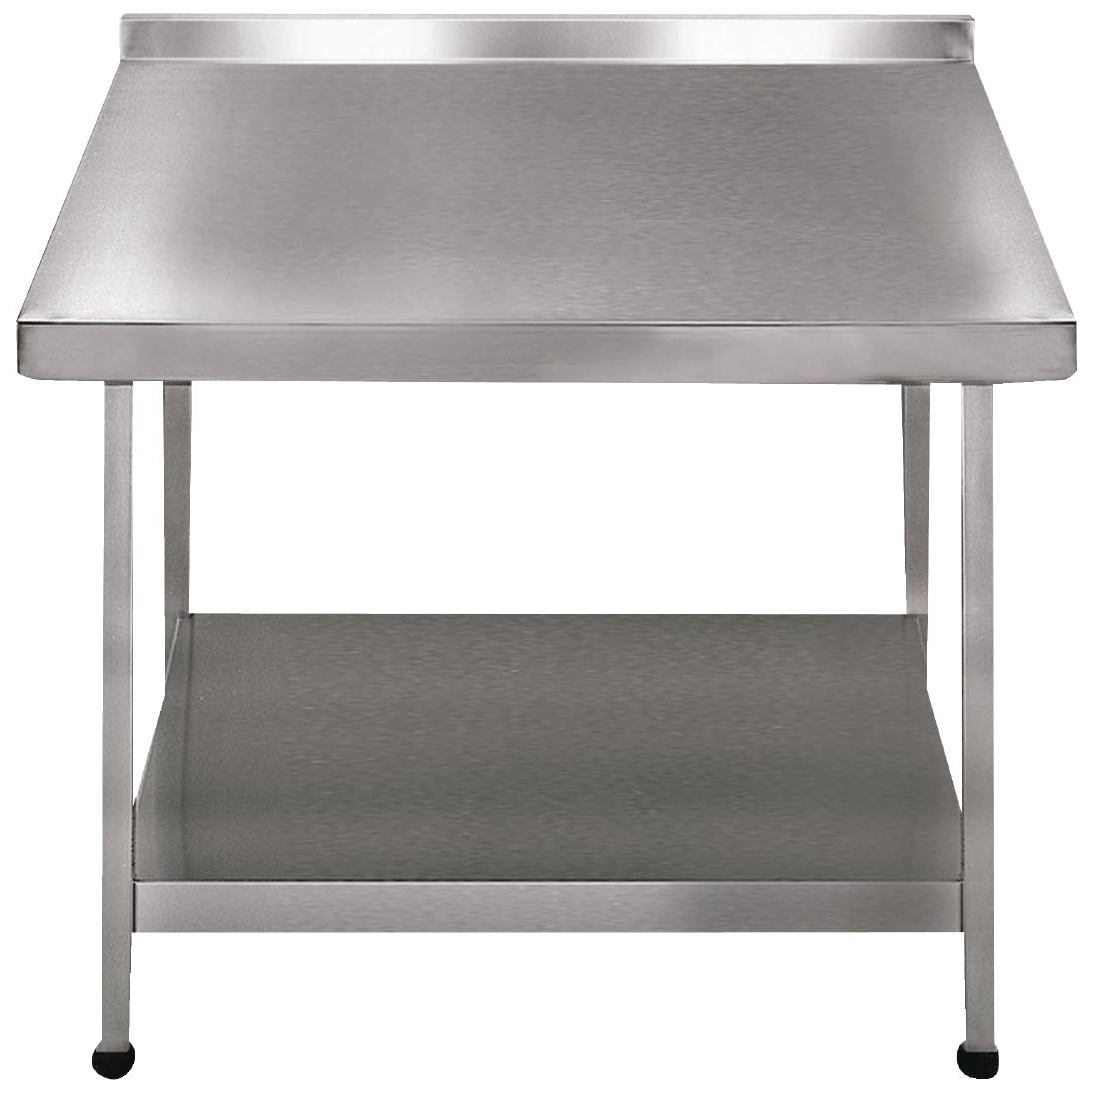 Franke Sissons Stainless Steel Wall Table with Upstand 900x650mm